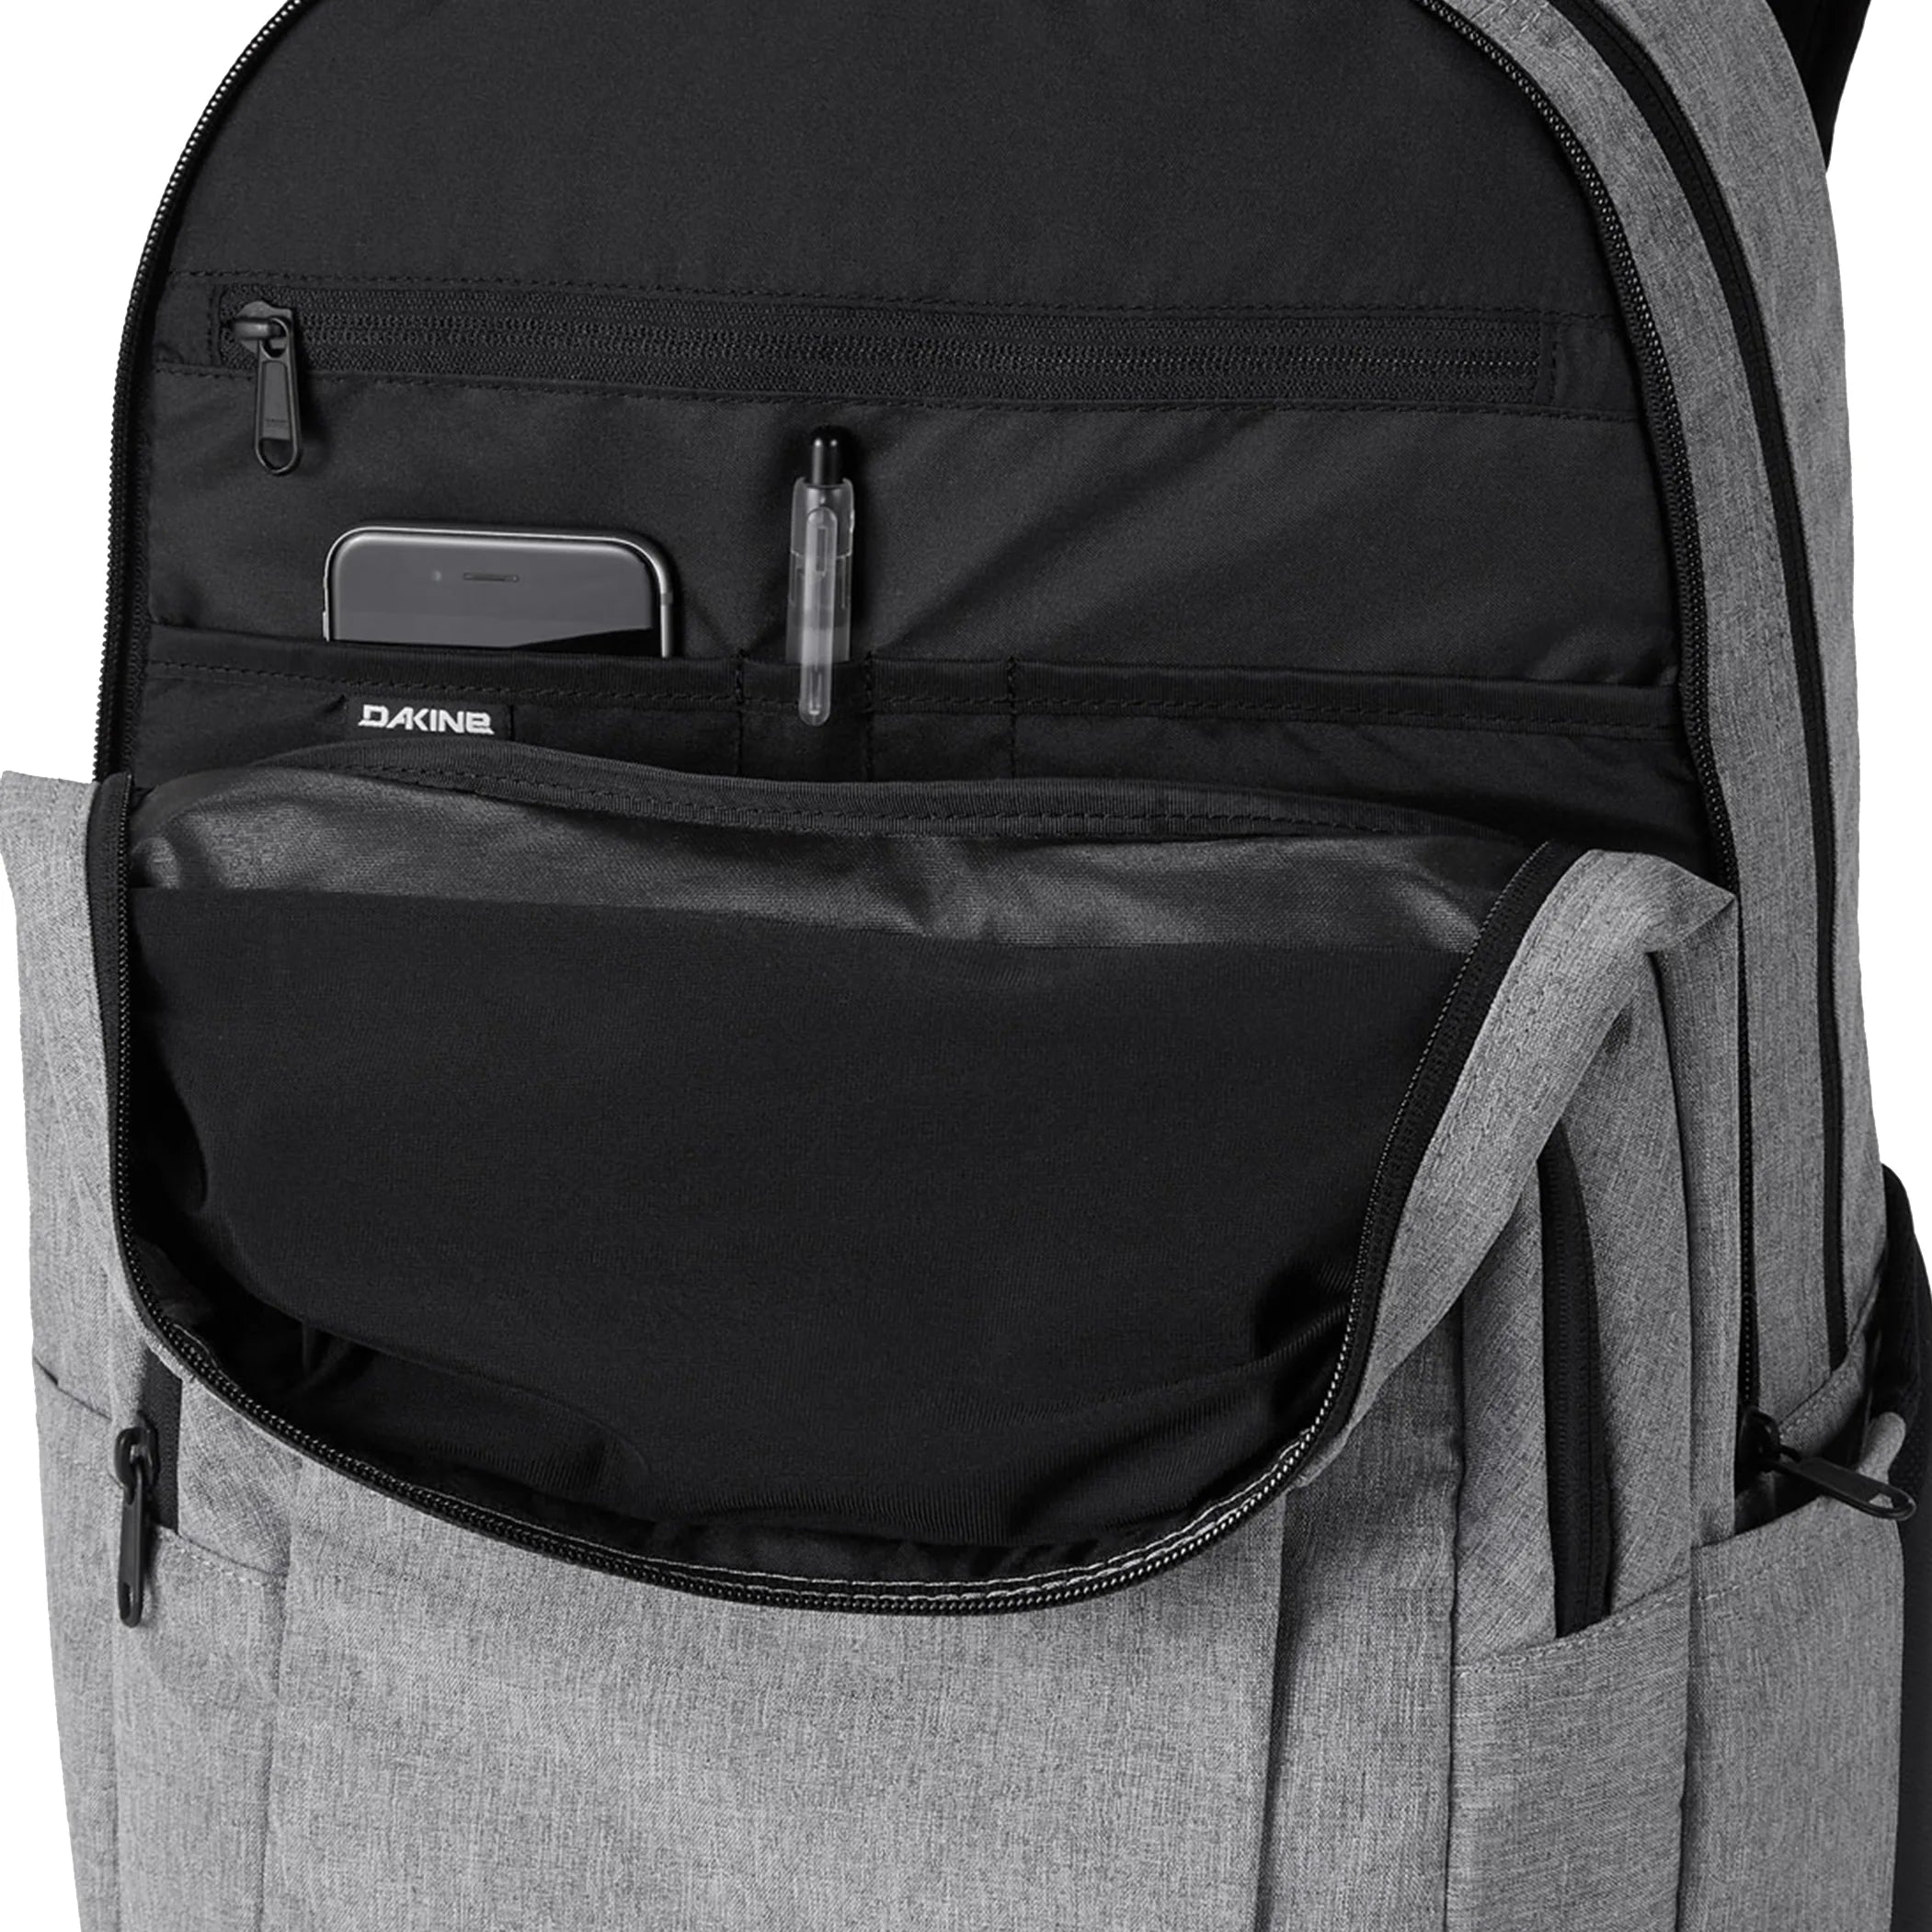 Dakine Packs & Bags Campus L 33L Backpack with Laptop Compartment 52 cm - Grapevine